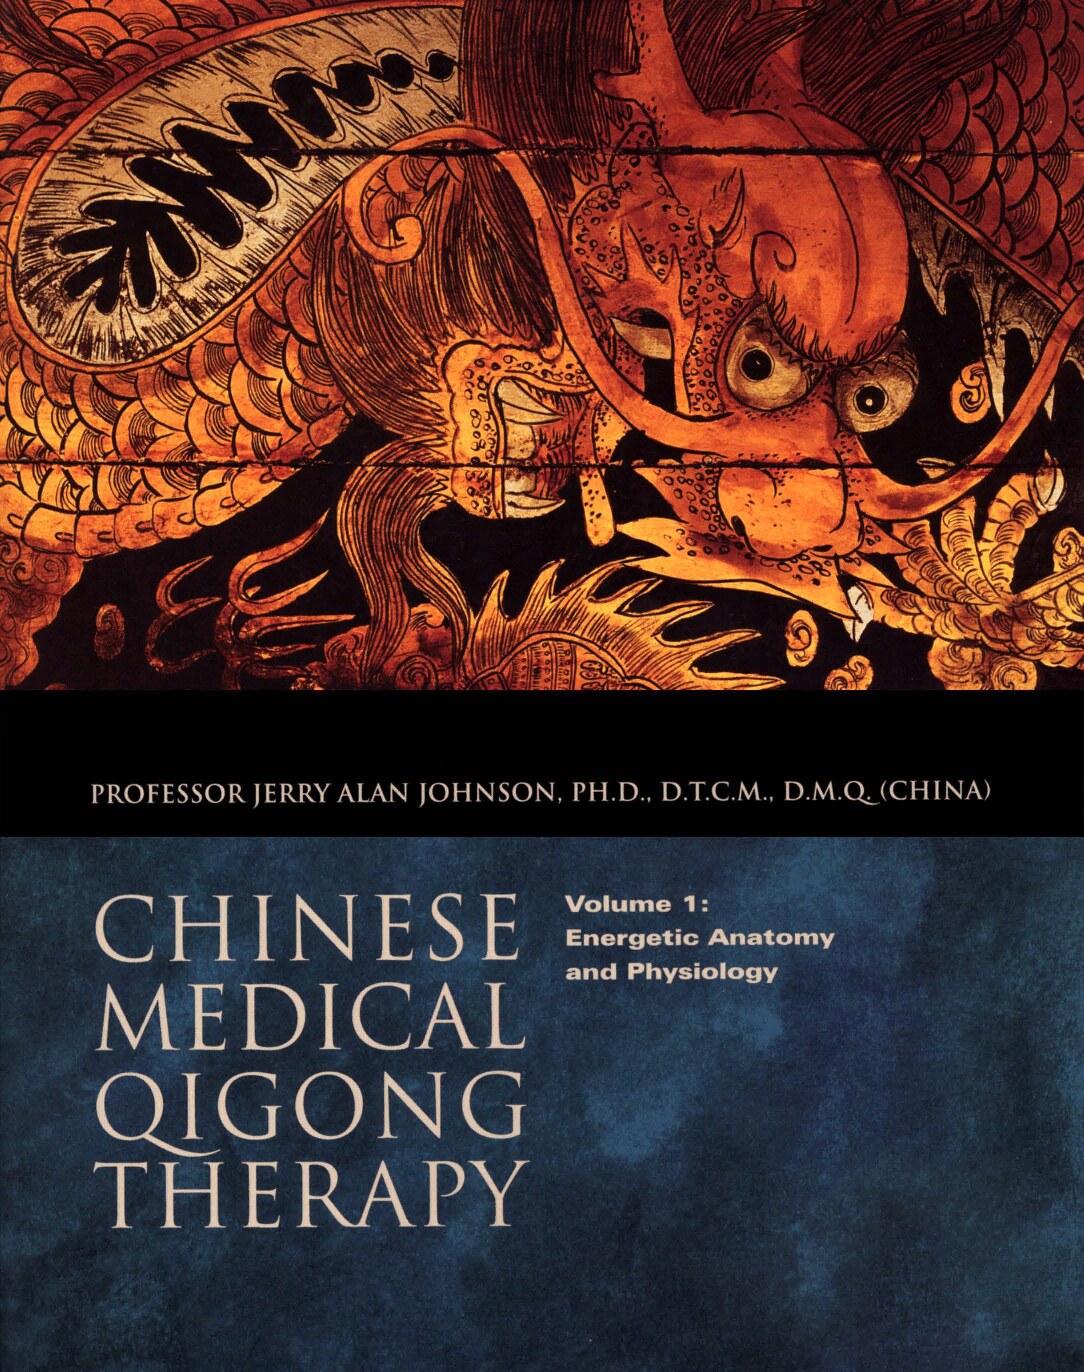 Chinese Medical Qigong Therapy - Volume 1: Energetic Anatomy and Physiology